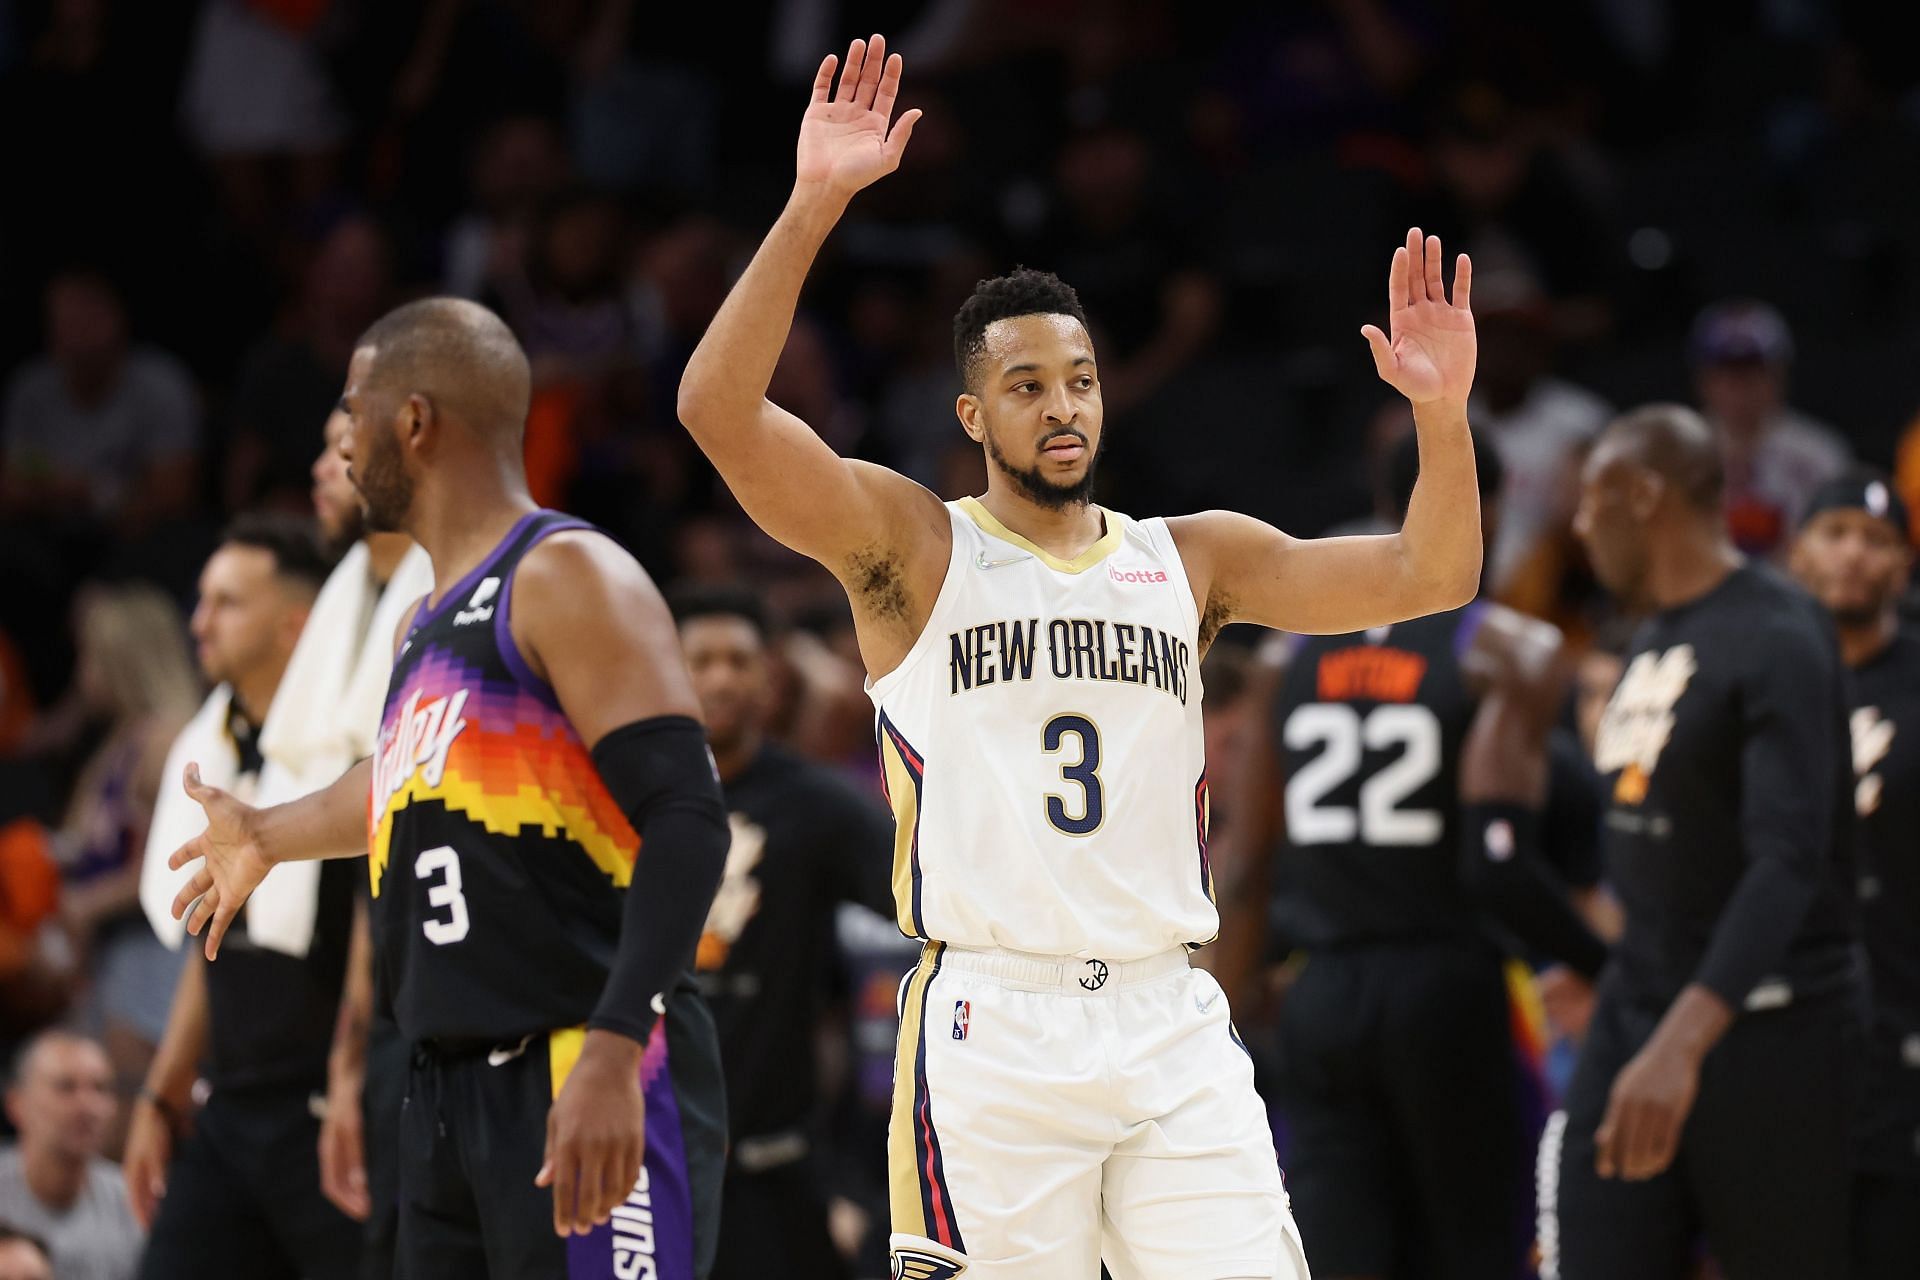 The New Orleans Pelicans will host the Phoenix Suns for Game 3 on April 22nd